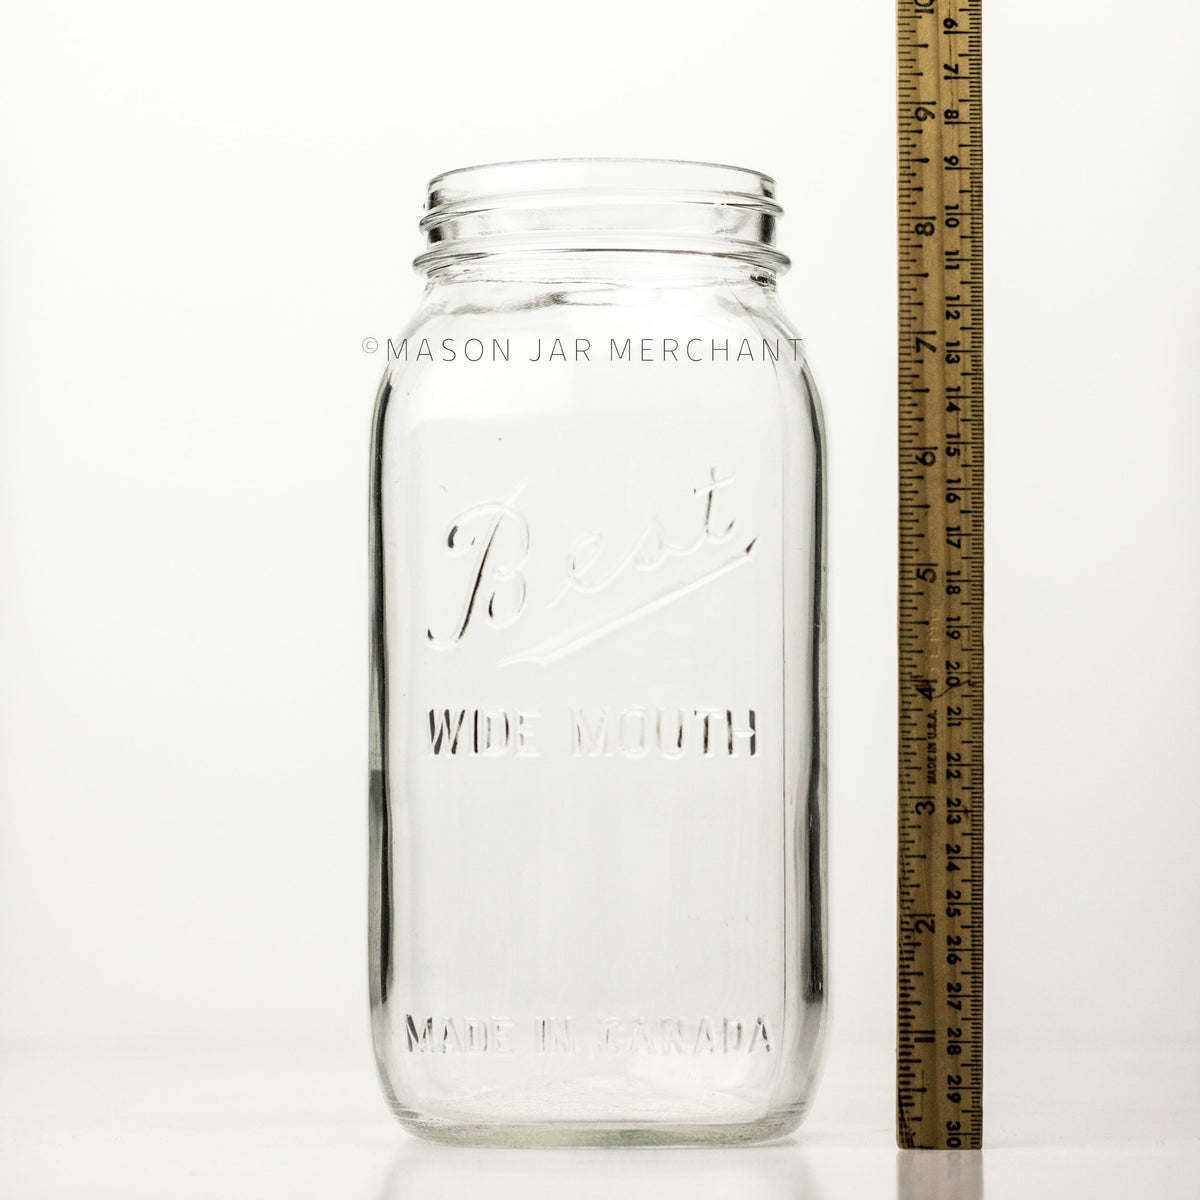 A Wide mouth half-gallon mason jar with Best Wide Mouth logo and a meter stick beside it and is shown against a white background